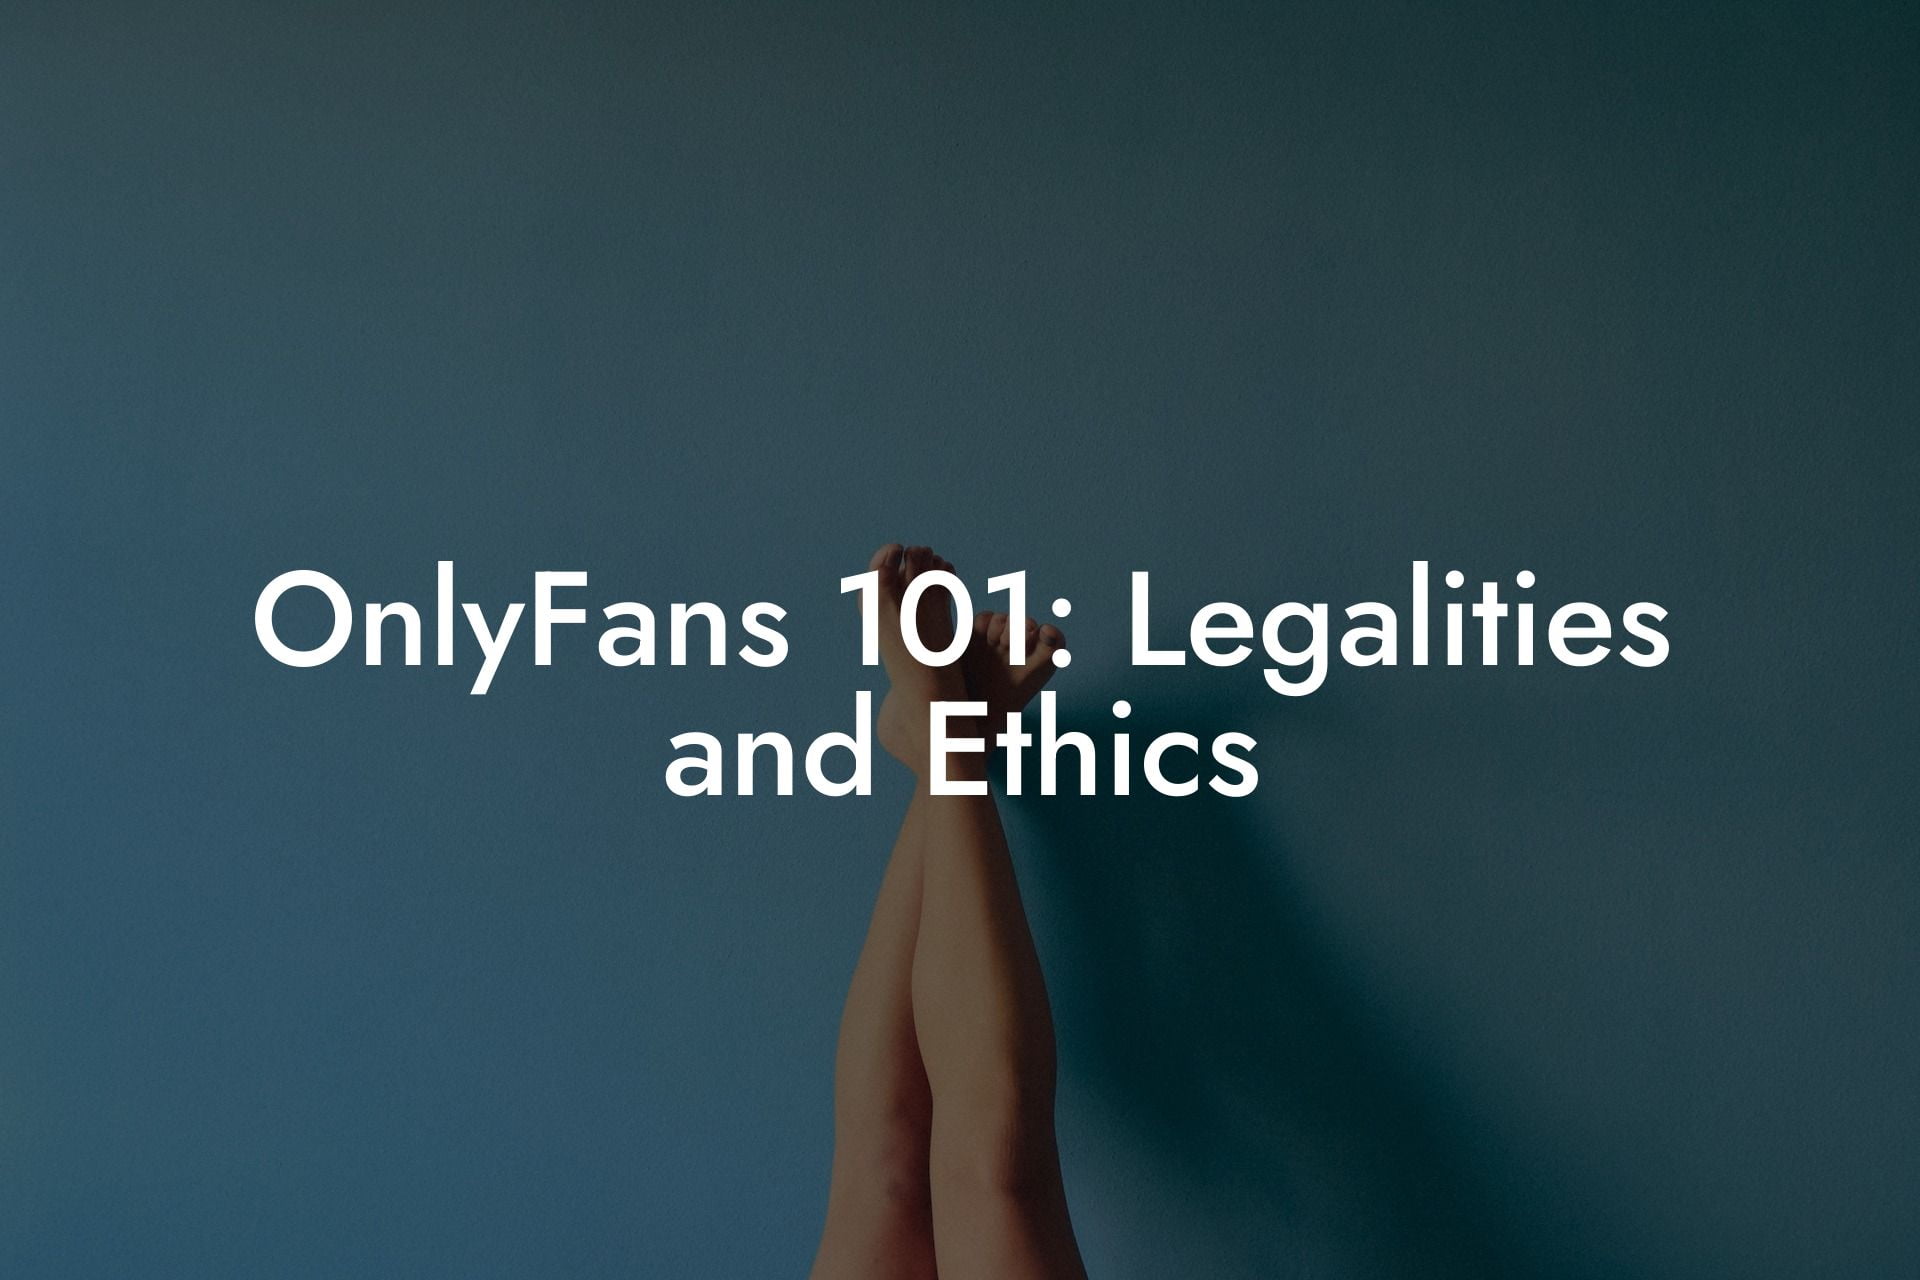 OnlyFans 101: Legalities and Ethics